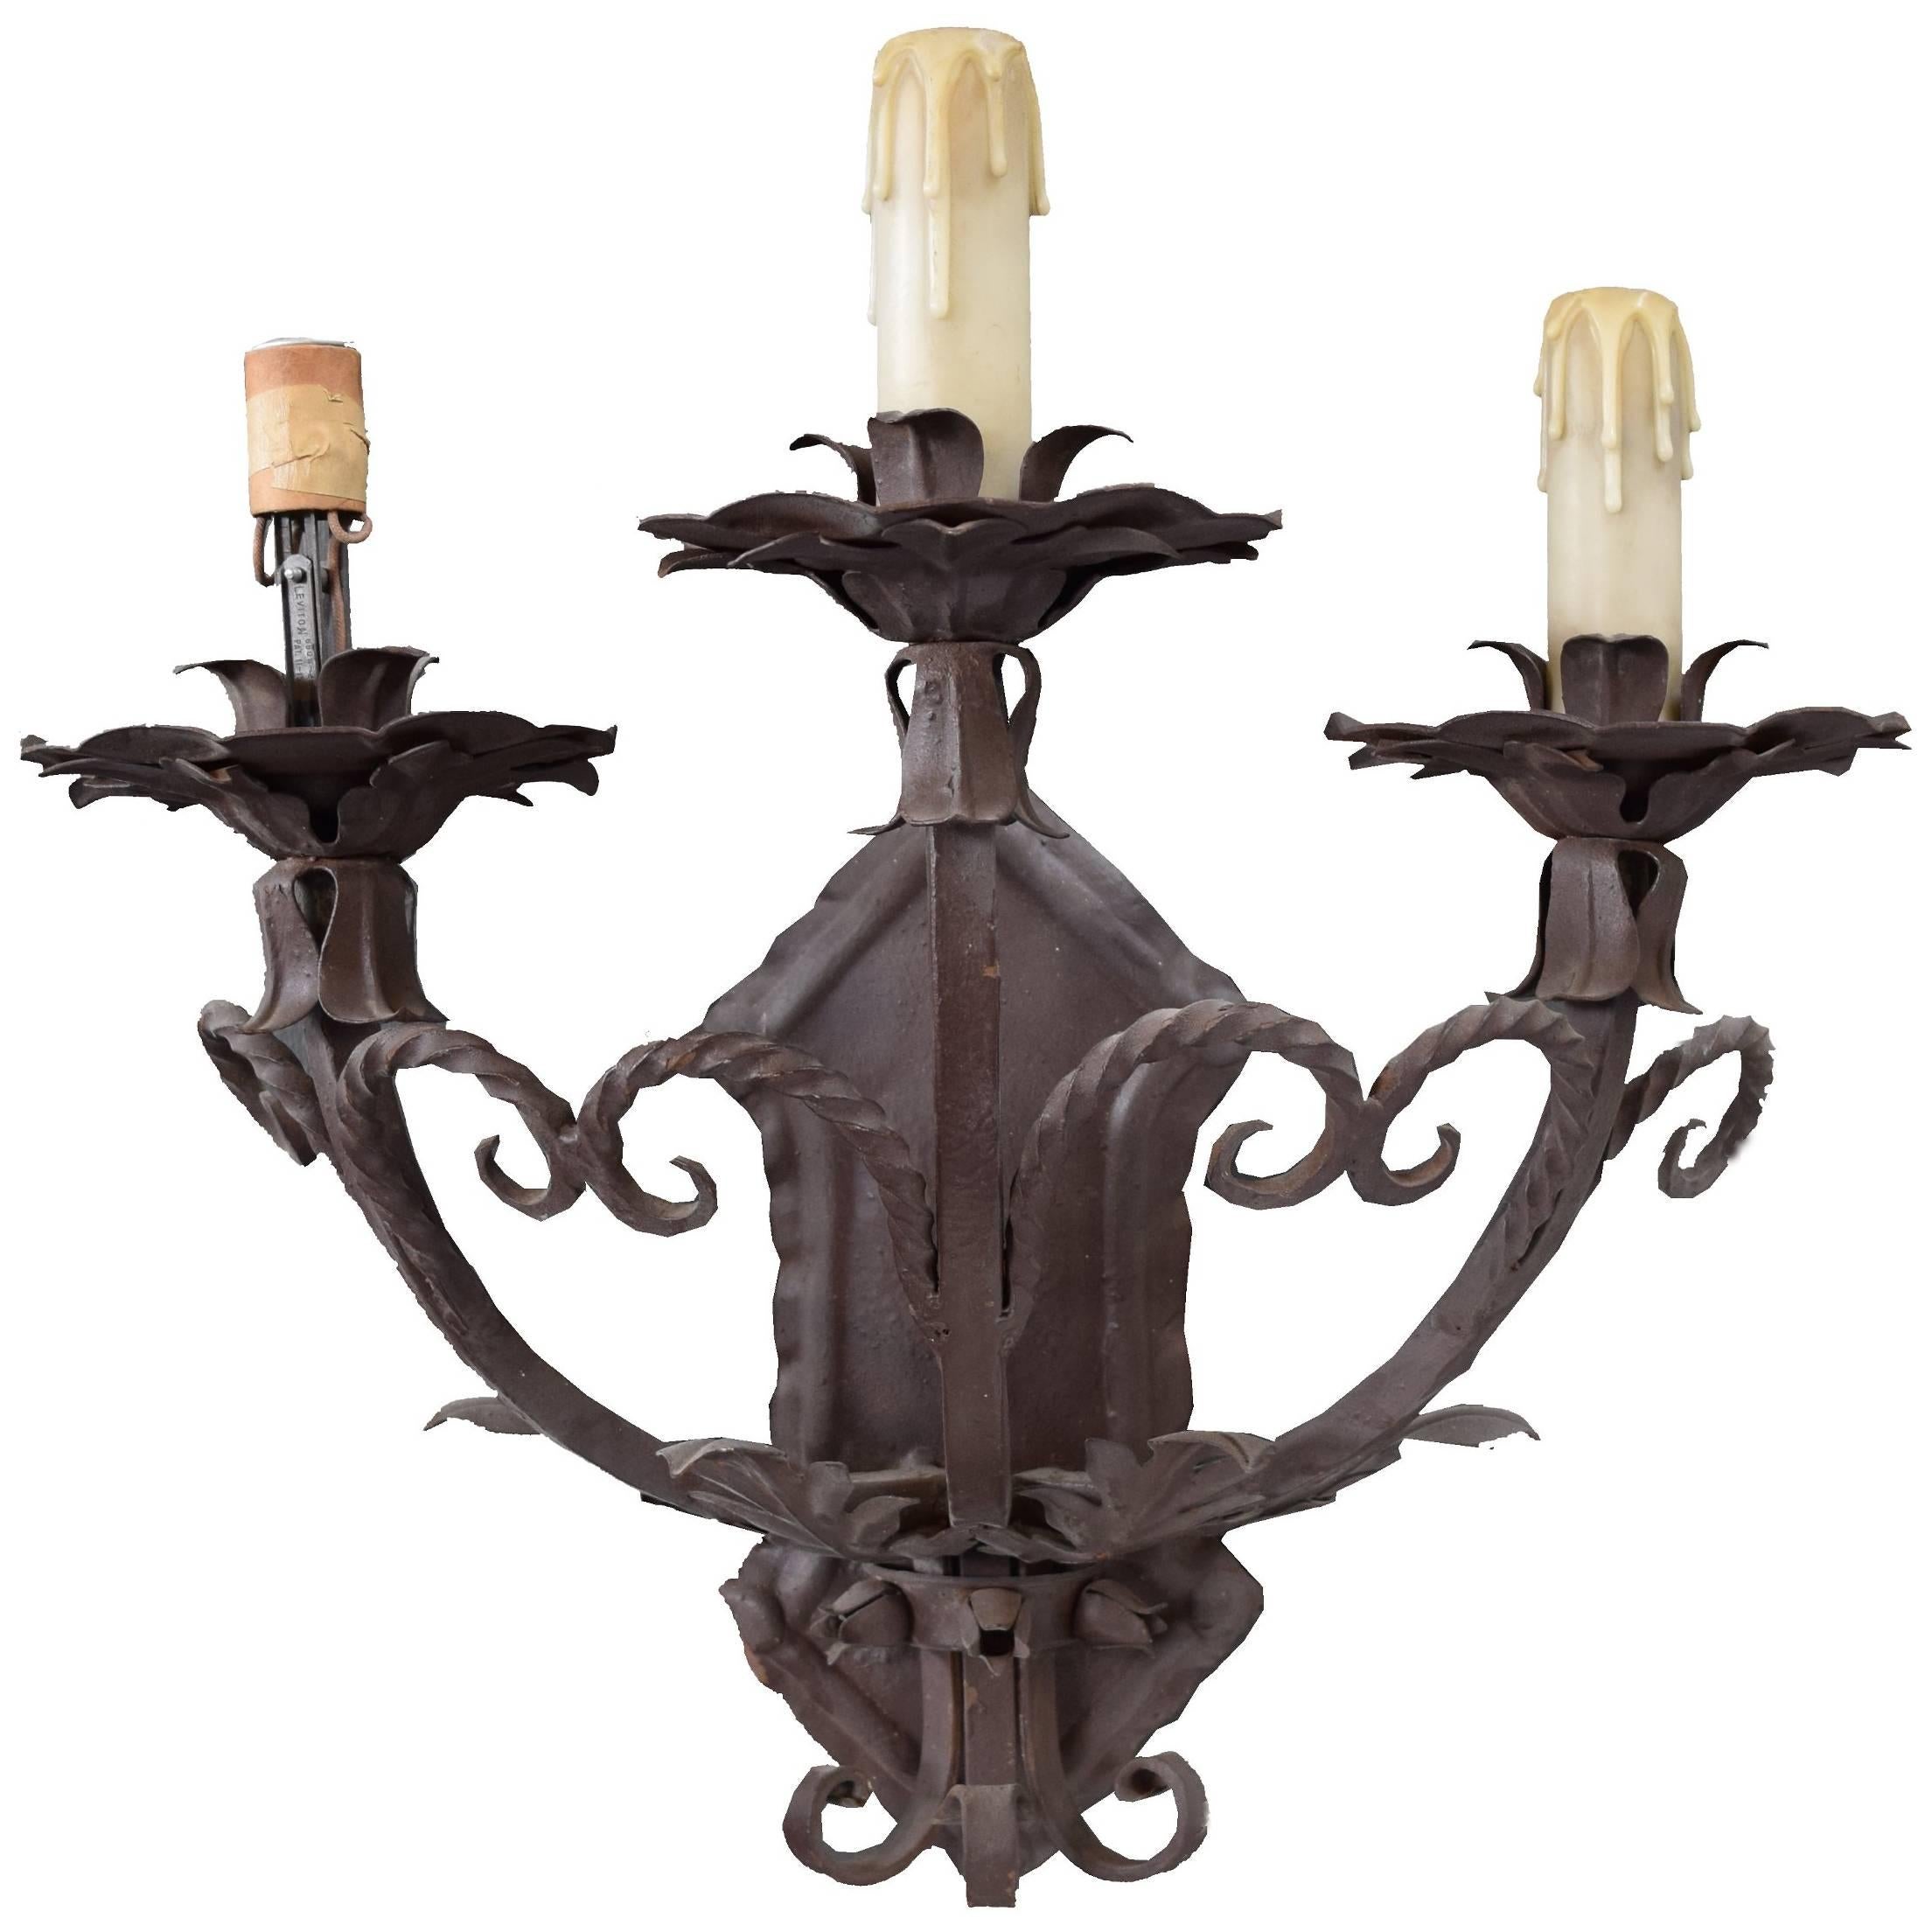 Argentine Wrought Iron Sconce